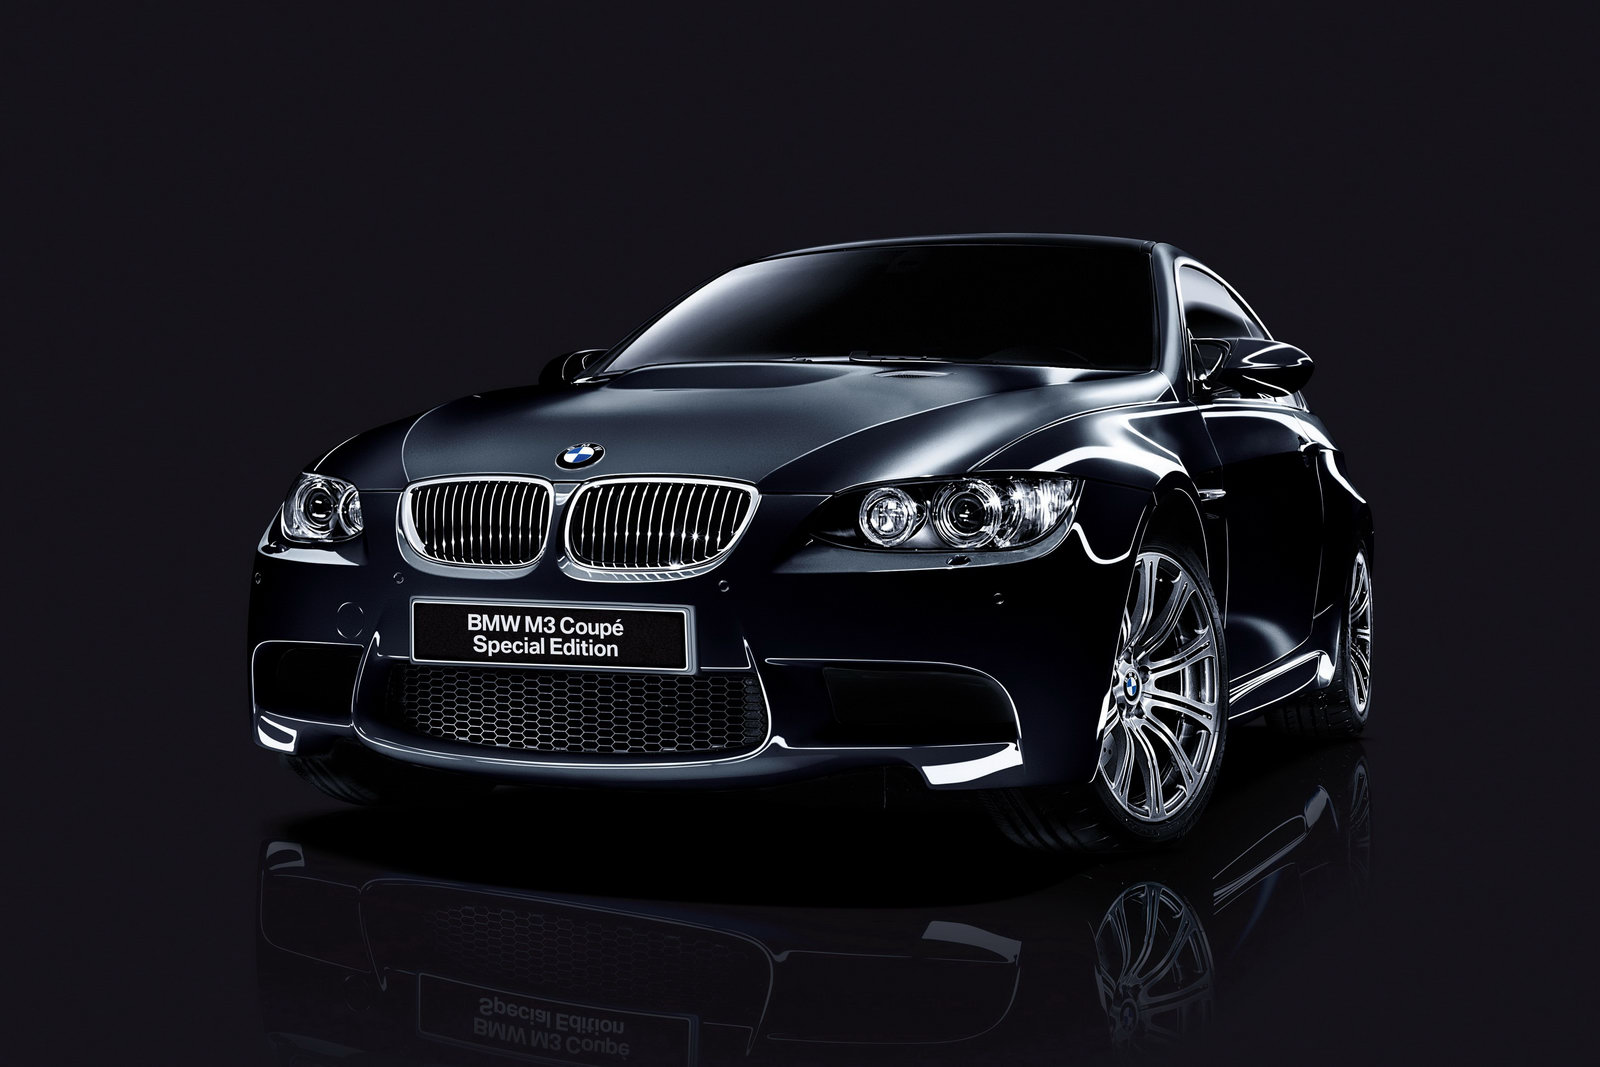 A new special edition for China, BMW M3 Matte Edition